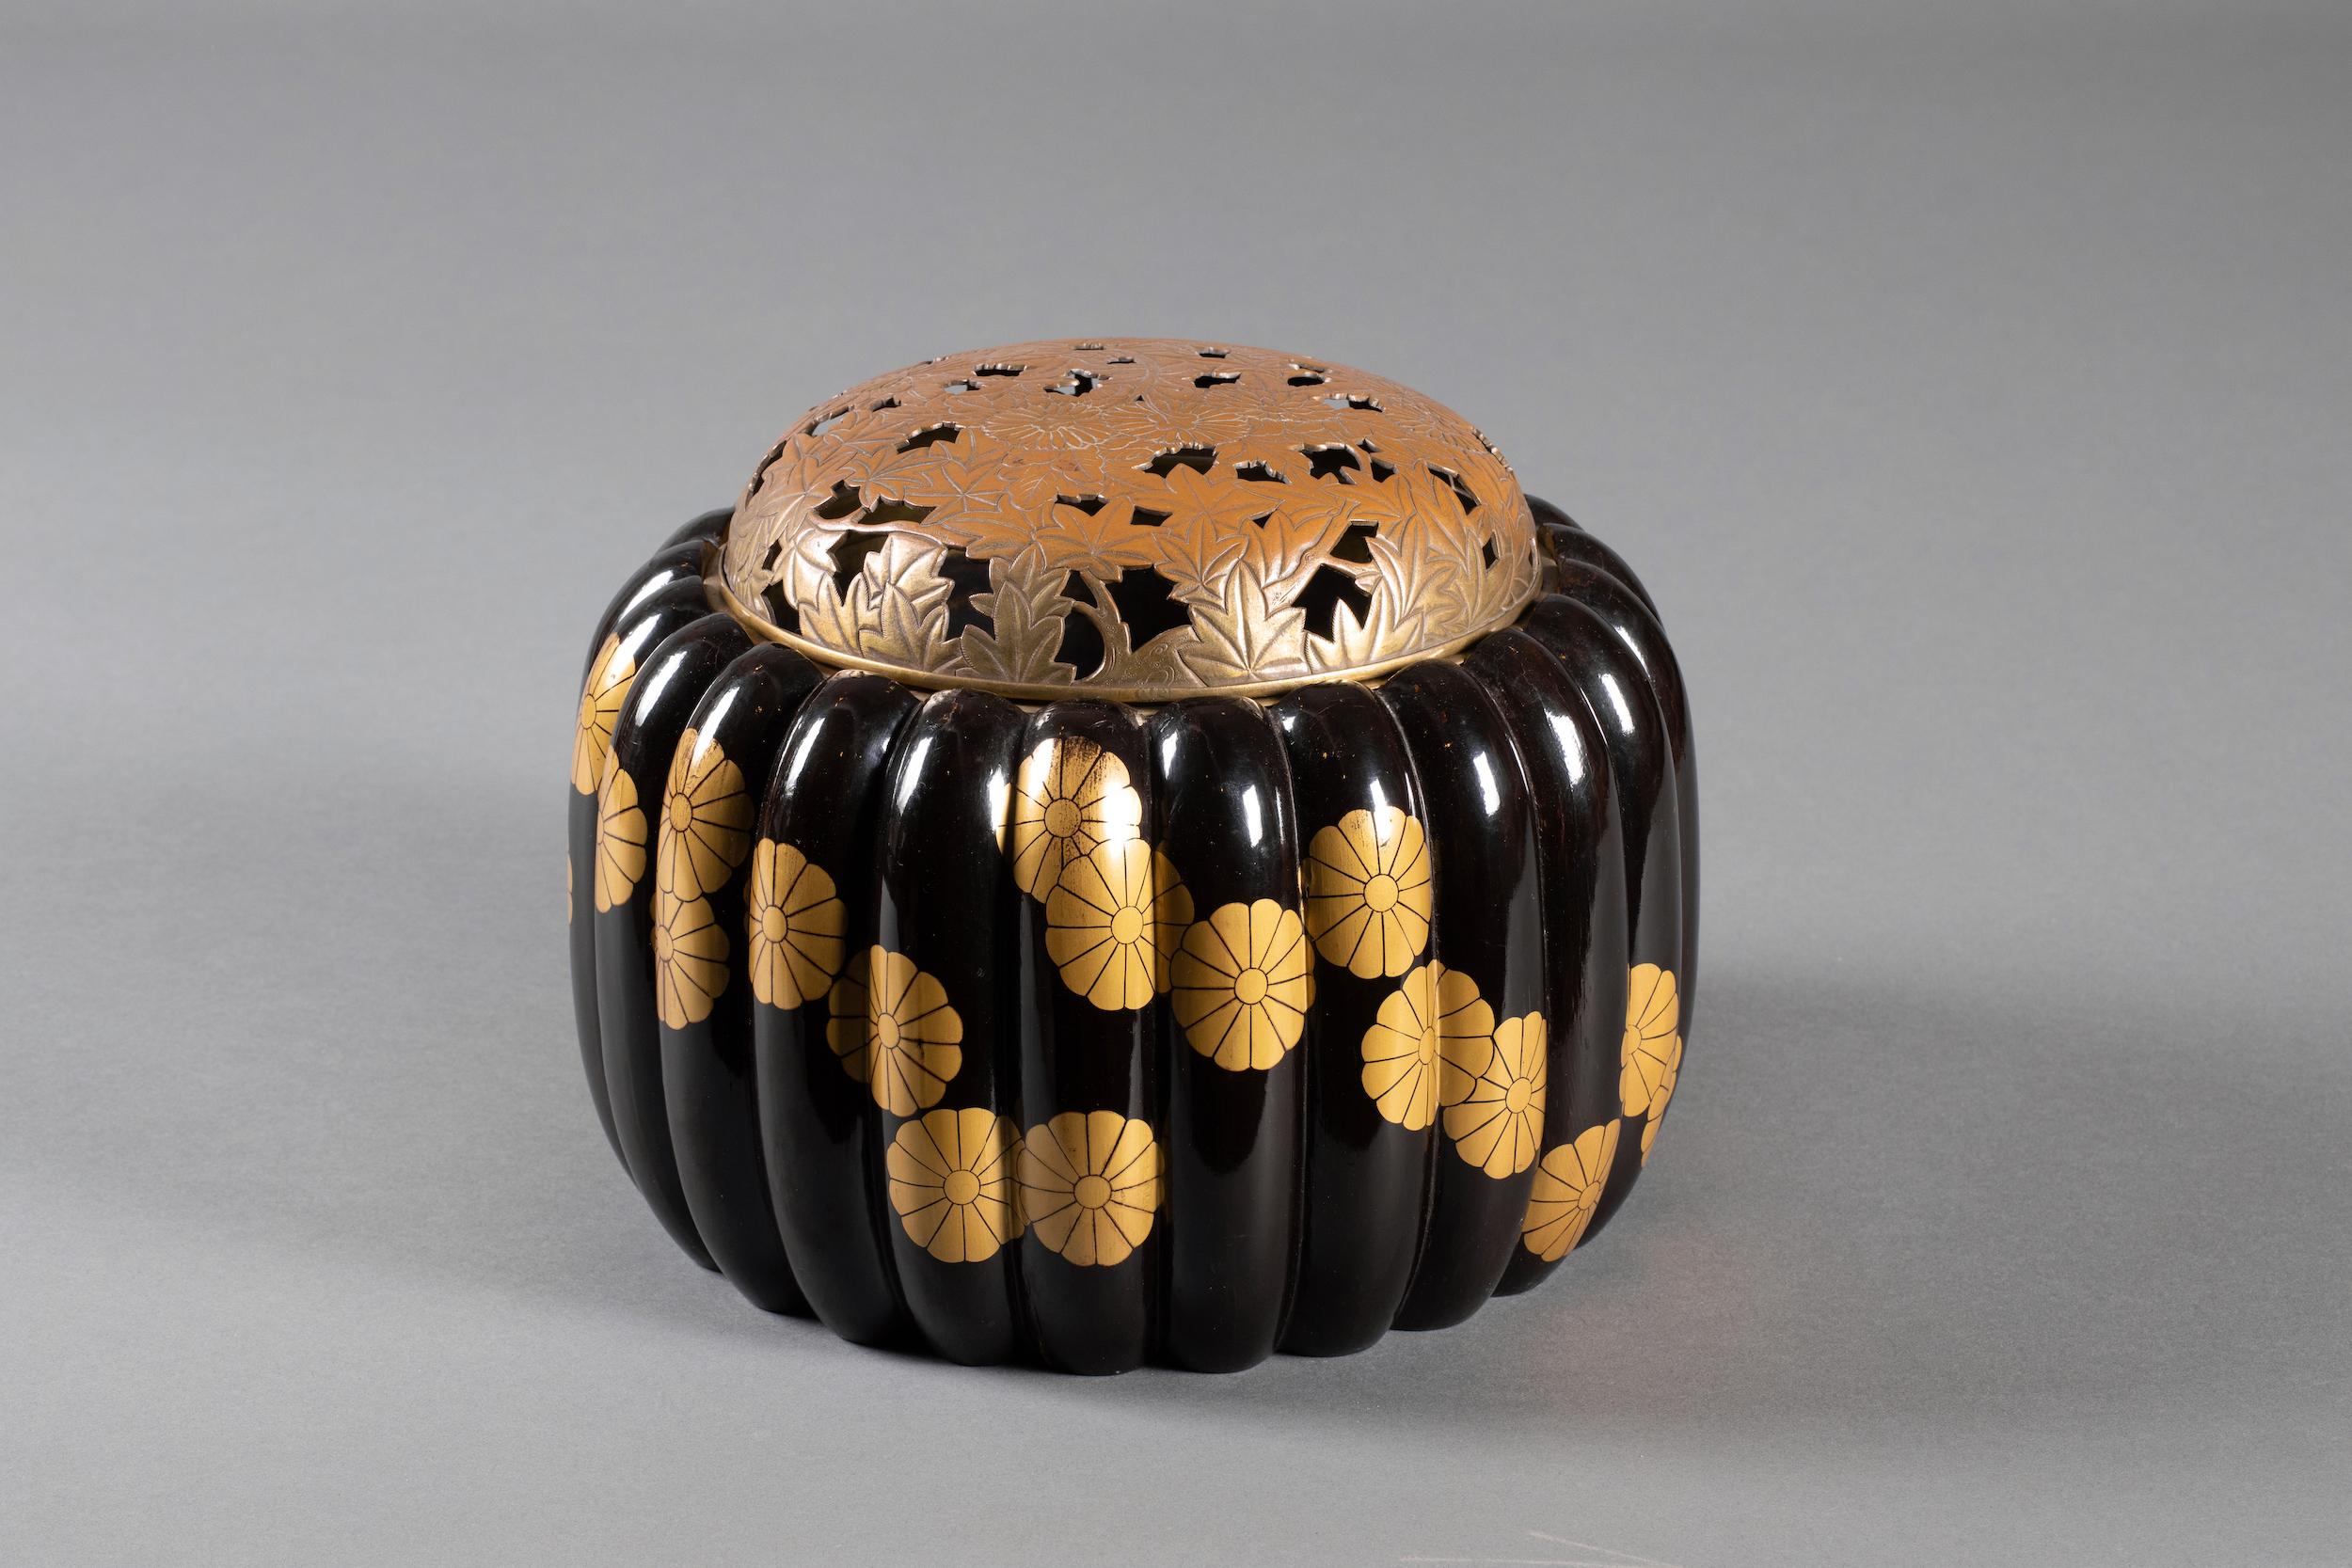 Japanese, Black Lacquer, Chrysanthemum Shaped Incense Burner 'Koro' In Good Condition For Sale In Hudson, NY